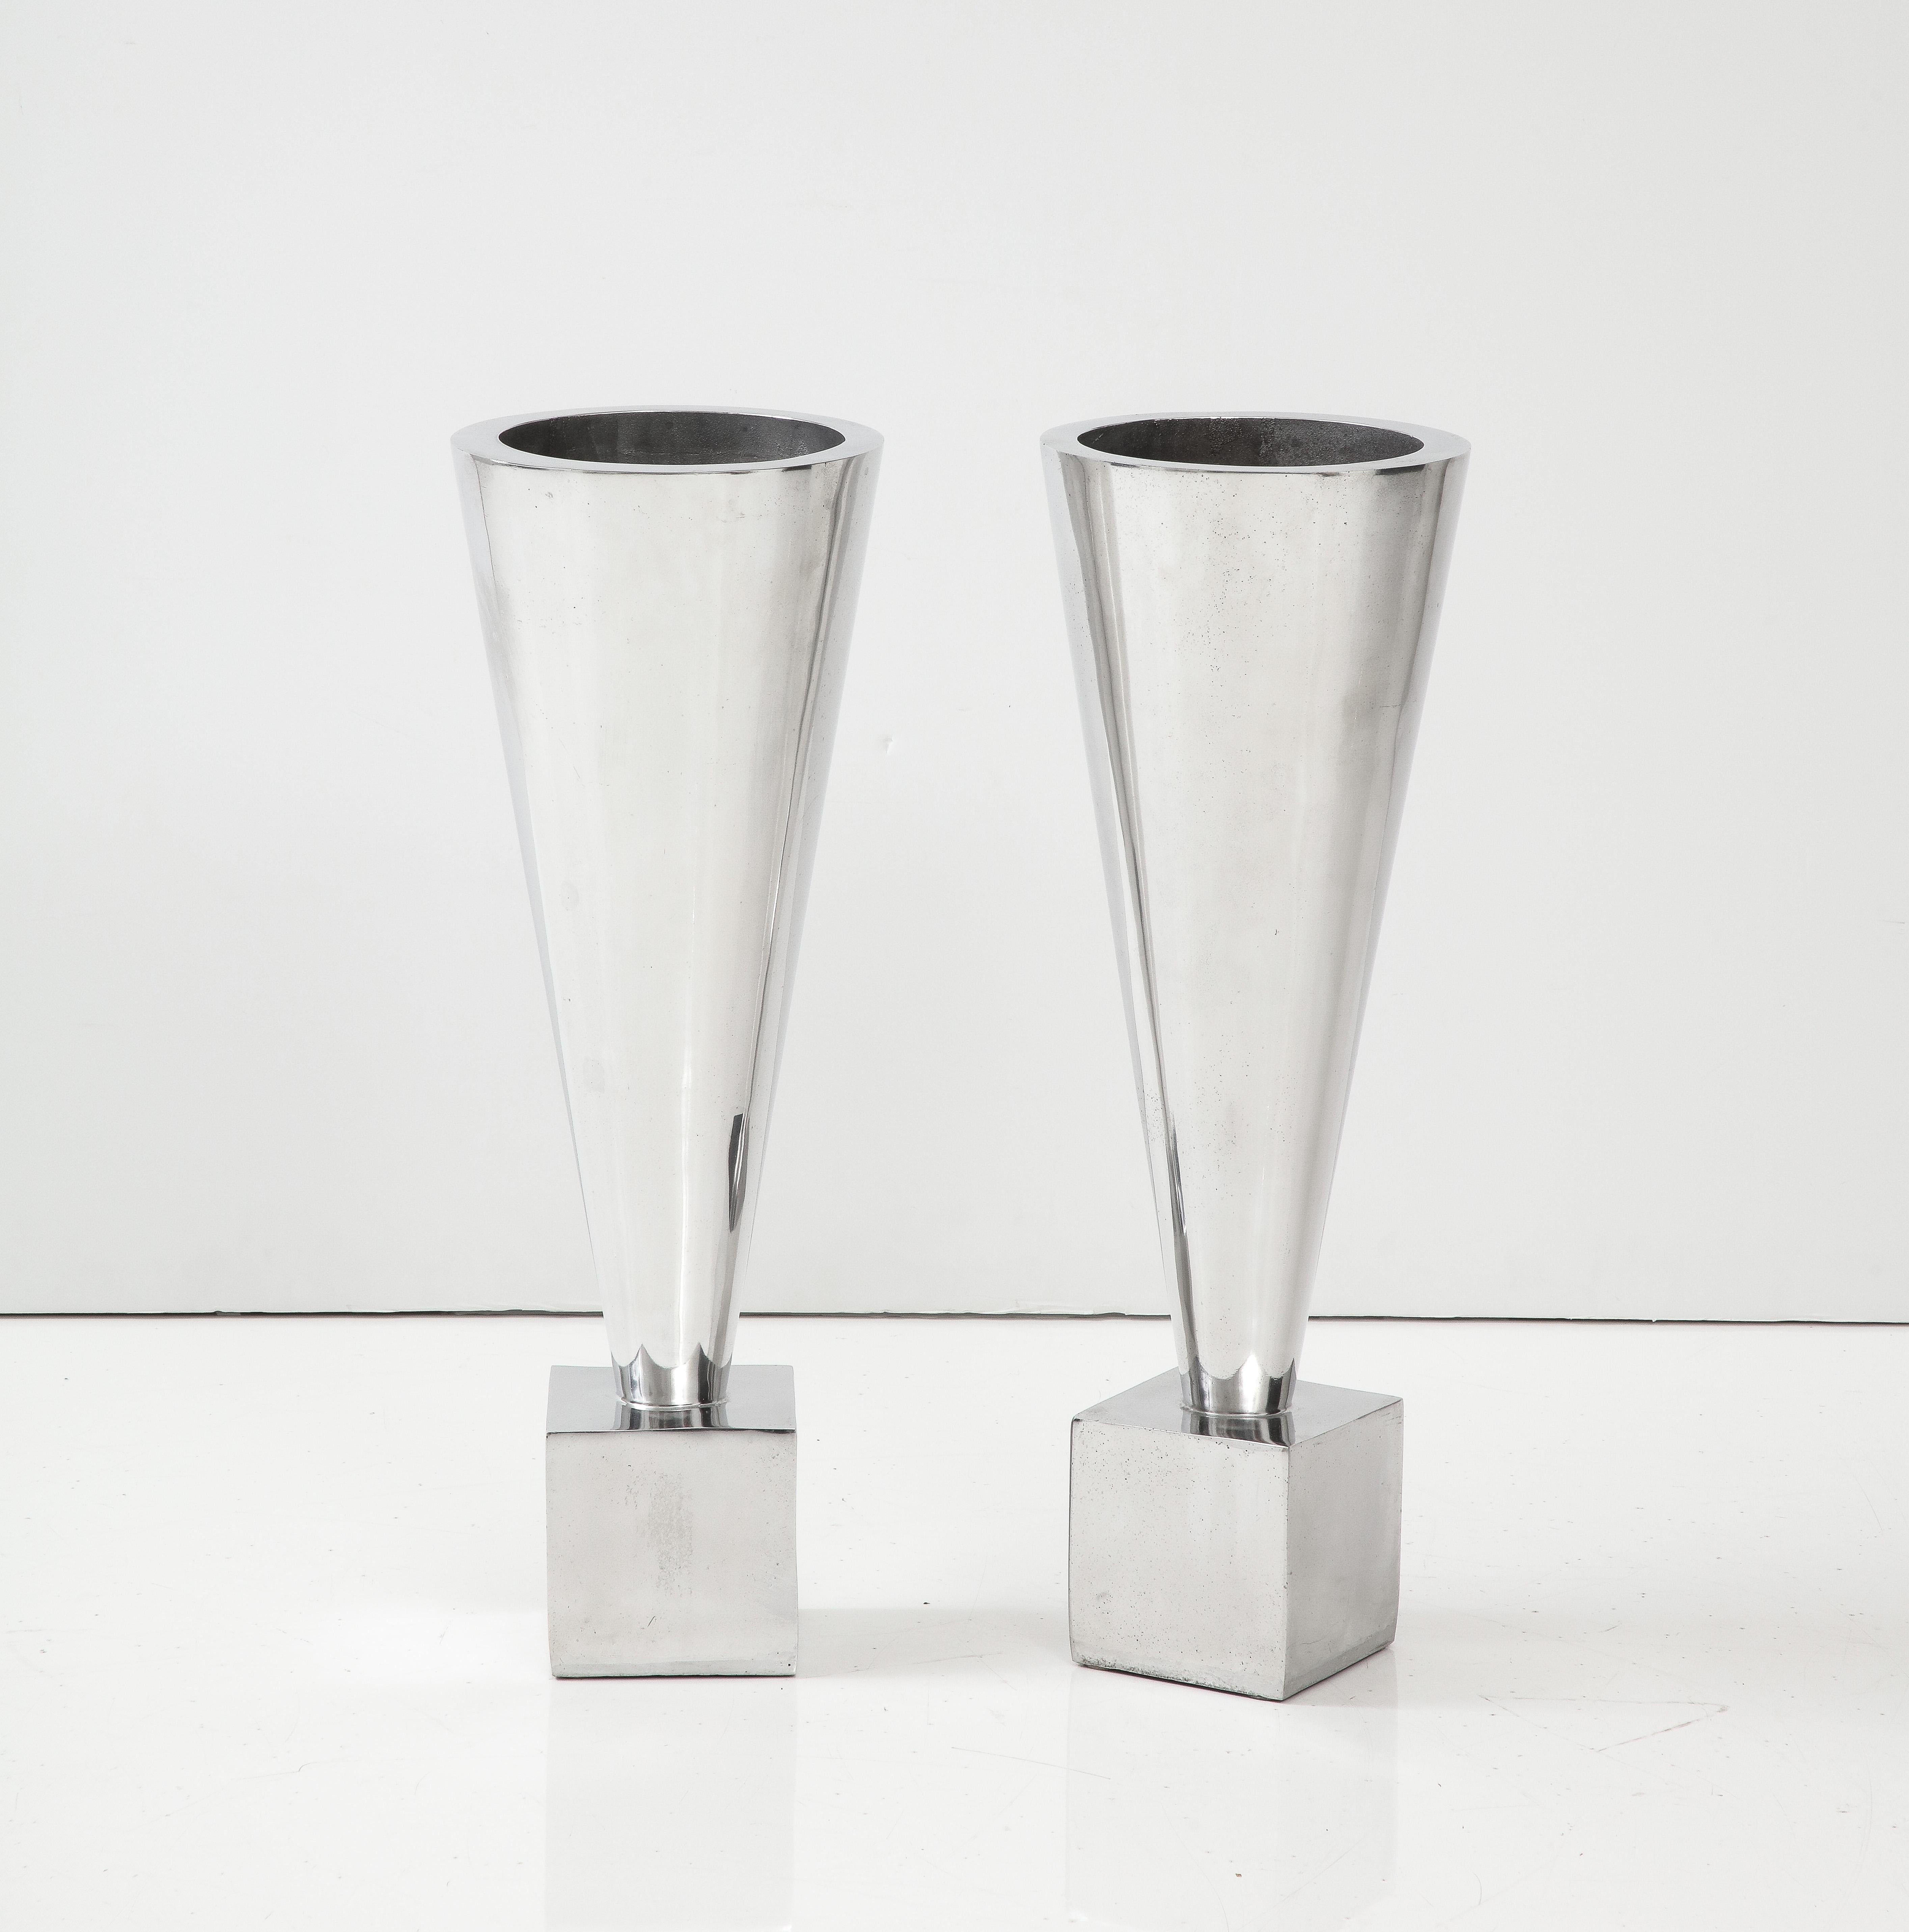 1970's Modernist Aluminum Planters/Vases  In Good Condition For Sale In New York, NY